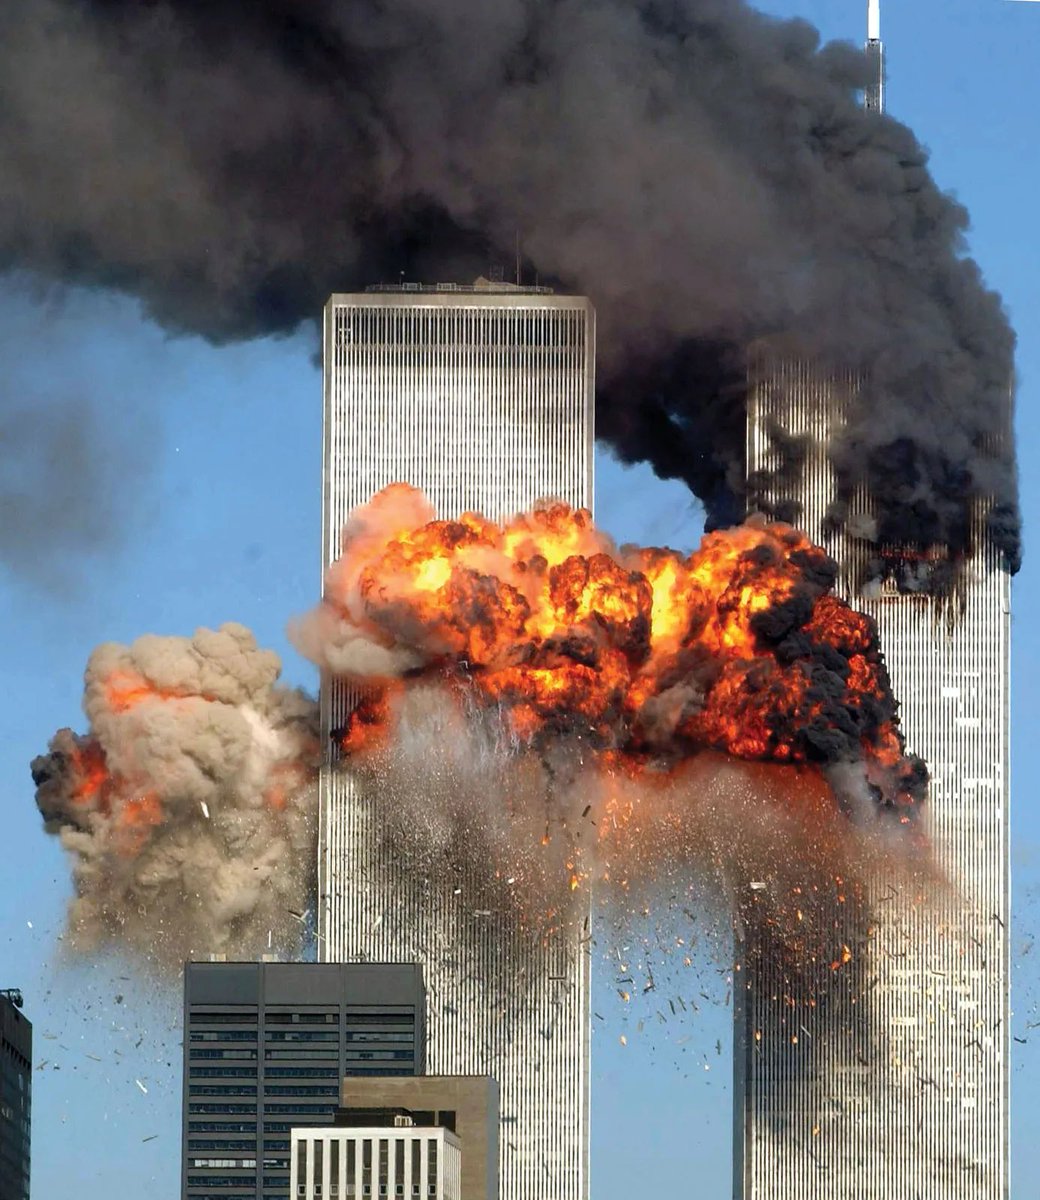 22 years has passed since the 9/11 terrorist attack occurred.